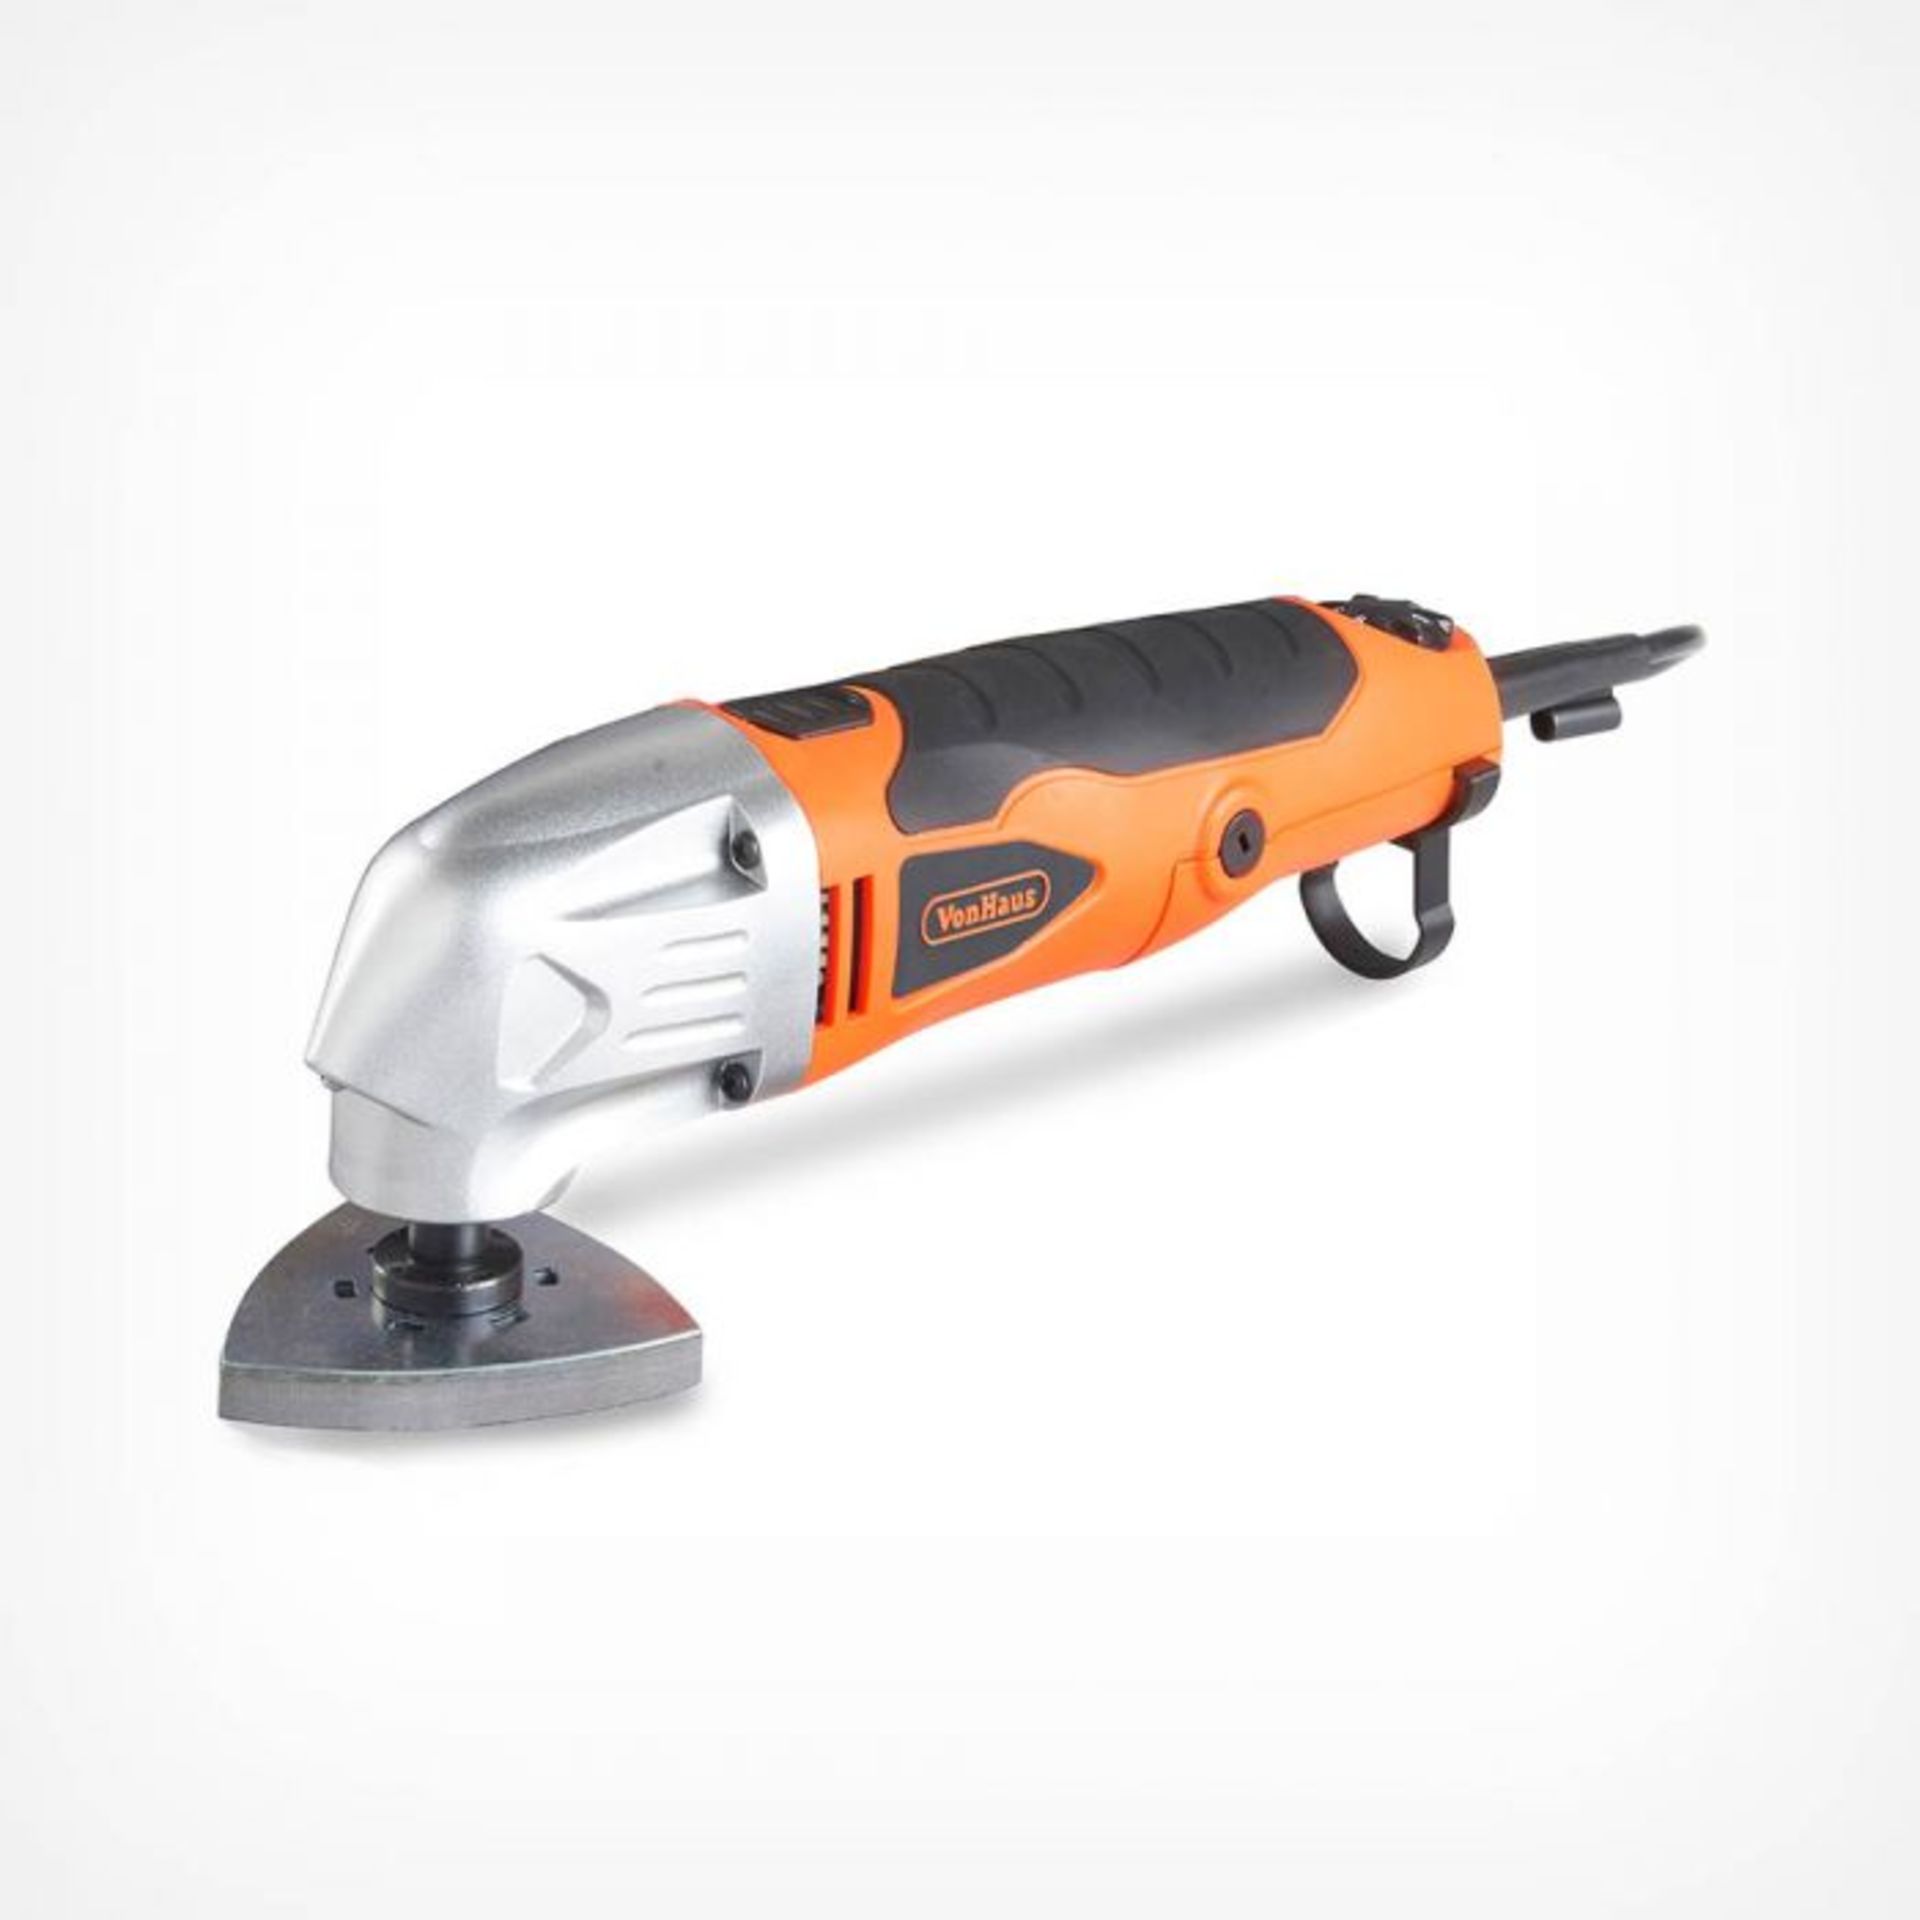 280W Oscillating Multi Tool. Designed to cut, saw and sand a wide range of materials including wood,